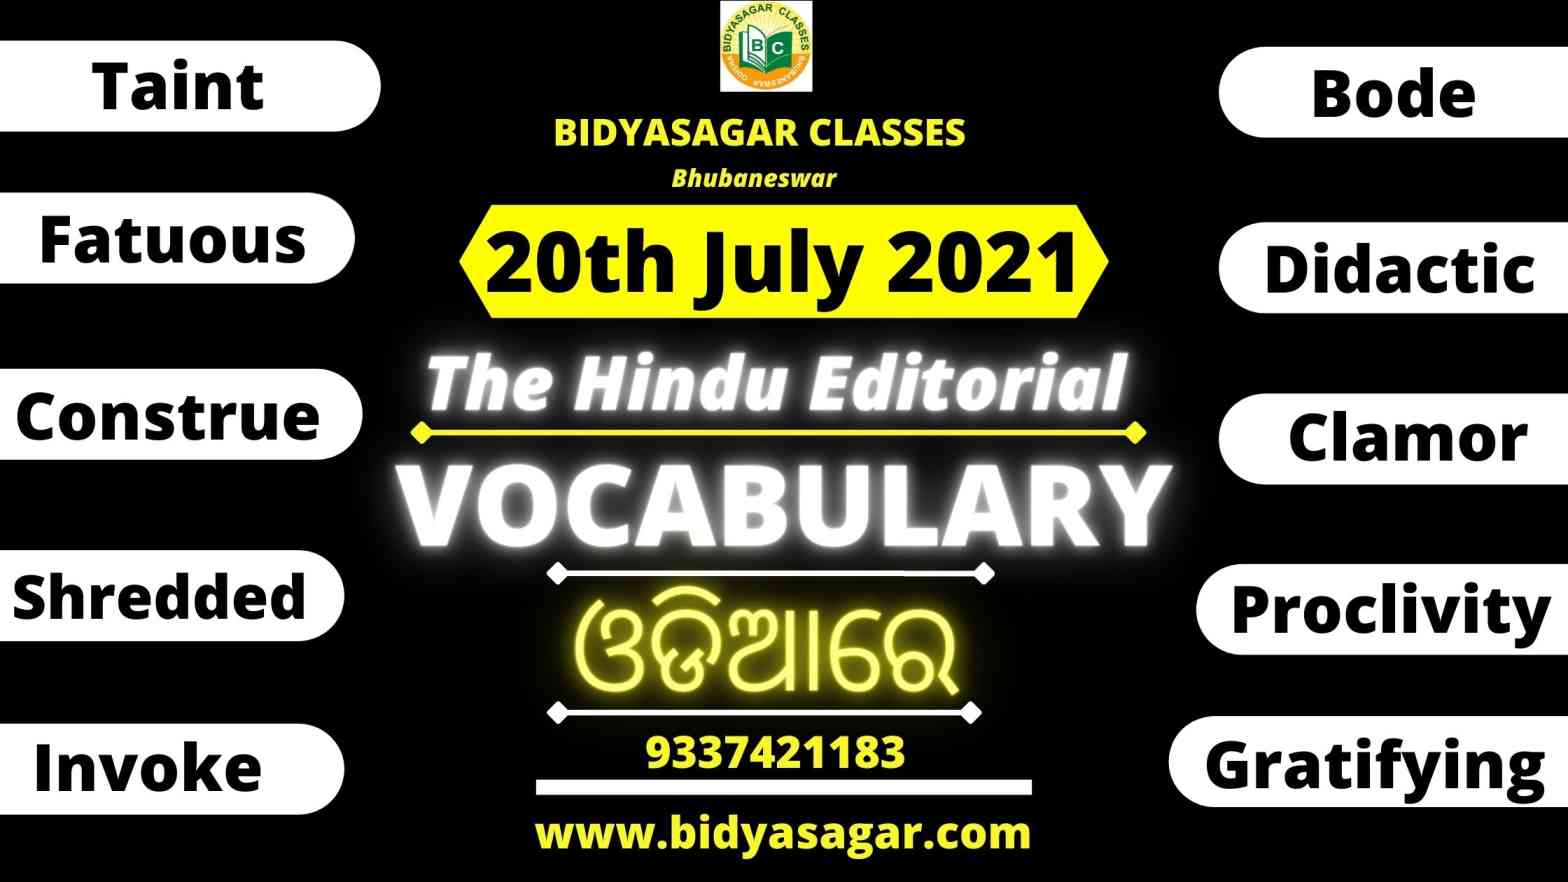 The Hindu Editorial Vocabulary of 20th July 2021